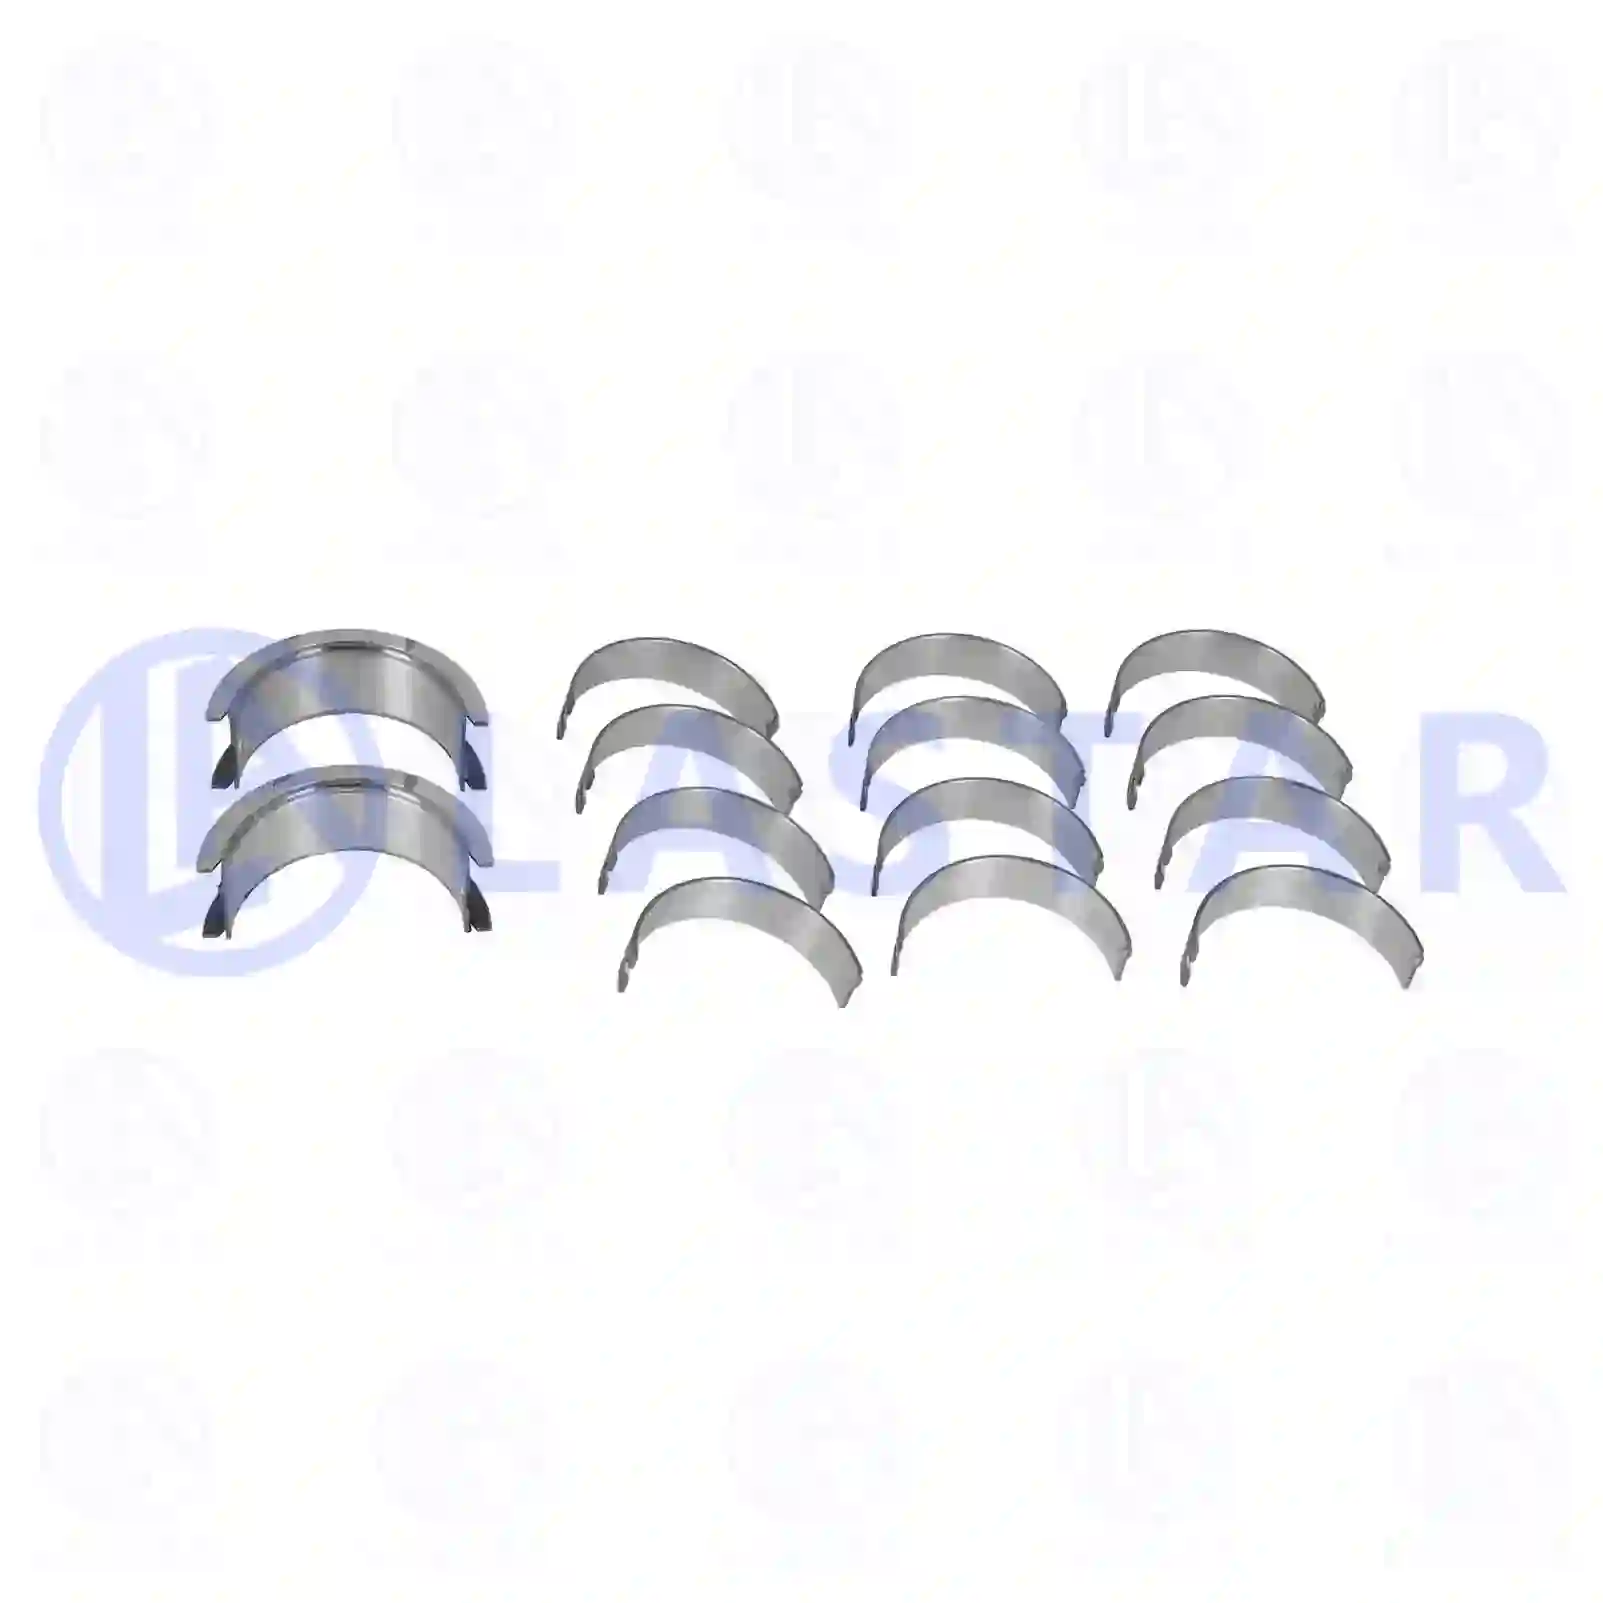 Camshaft bearing kit, 77700893, 7485103719, 7485103723, 85103719, 85103723 ||  77700893 Lastar Spare Part | Truck Spare Parts, Auotomotive Spare Parts Camshaft bearing kit, 77700893, 7485103719, 7485103723, 85103719, 85103723 ||  77700893 Lastar Spare Part | Truck Spare Parts, Auotomotive Spare Parts